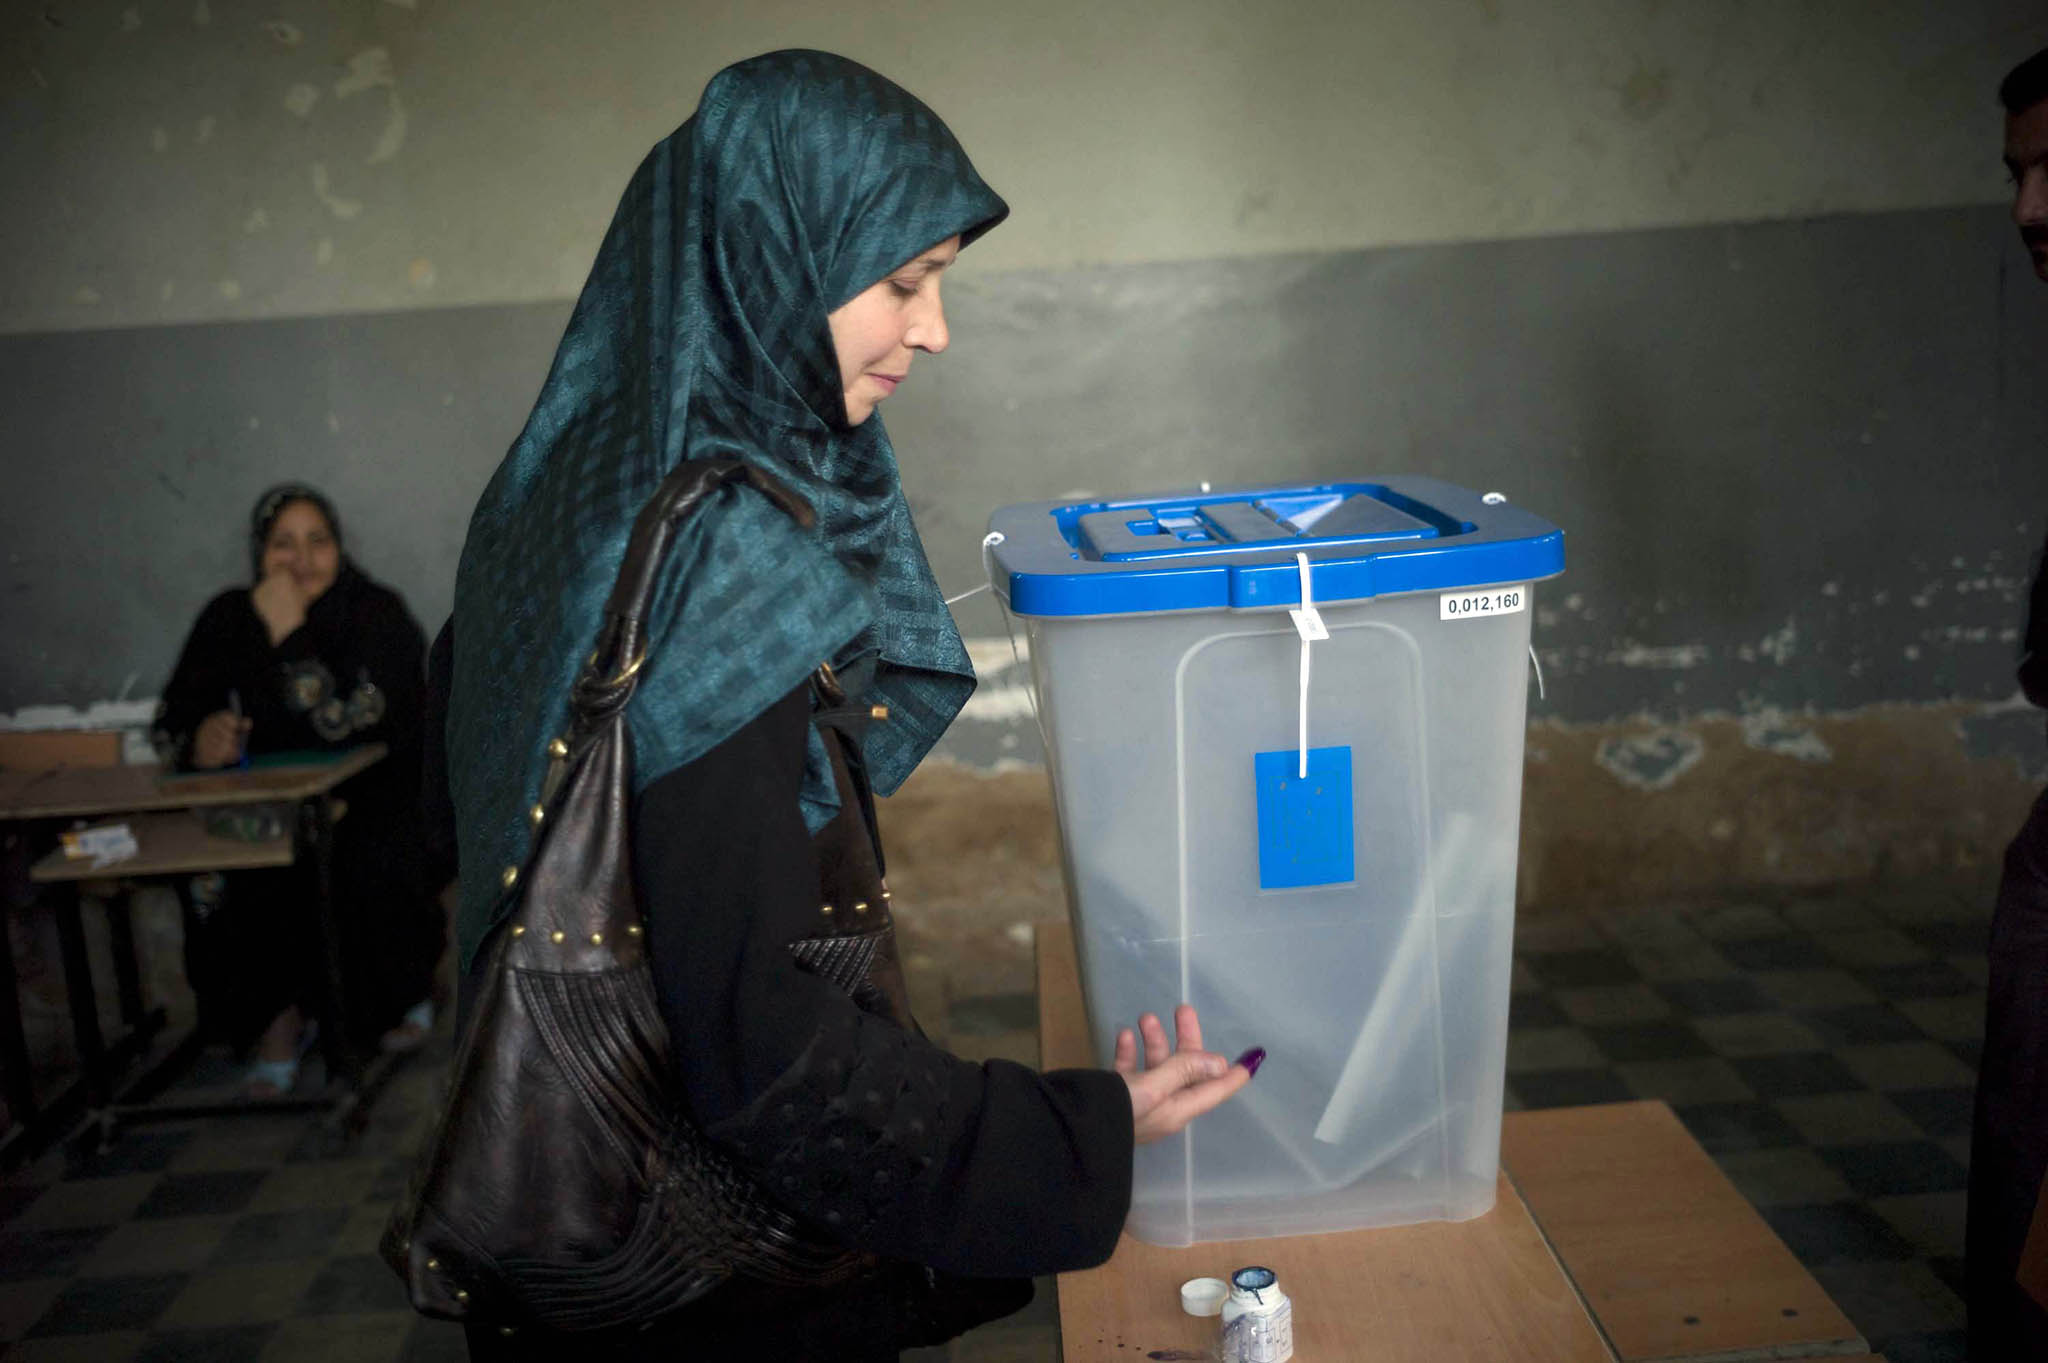 A woman cast her vote in the Karrada neighborhood of Baghdad on March 7, 2010. Iraqis will vote in provincial council elections on December 18. (Michael Kamber/The New York Times)